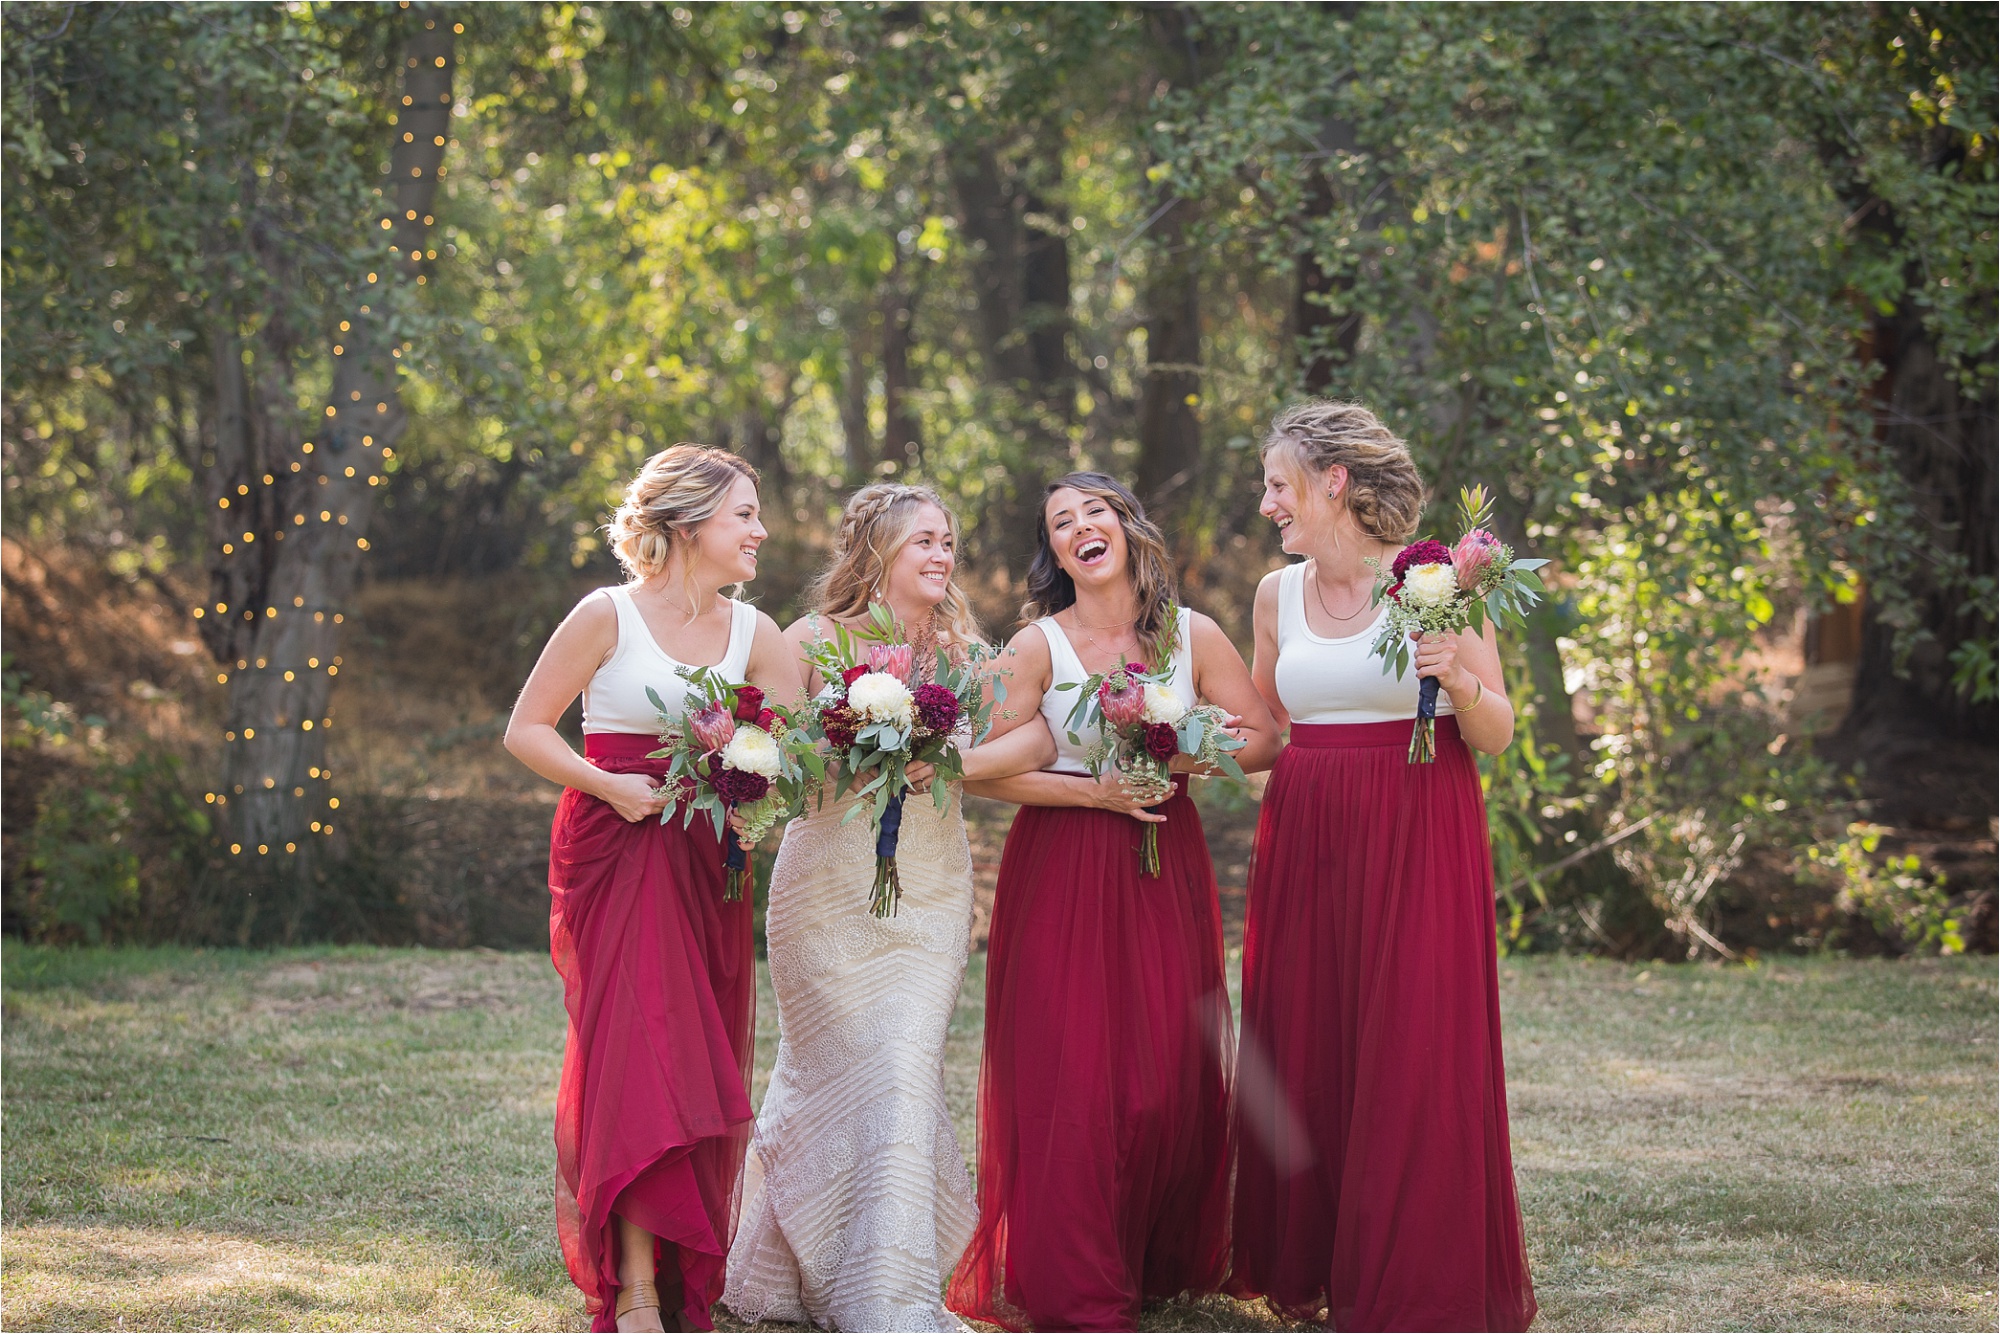 The Stacys || Wedding Photographers in Kernville » Finding Focus ...